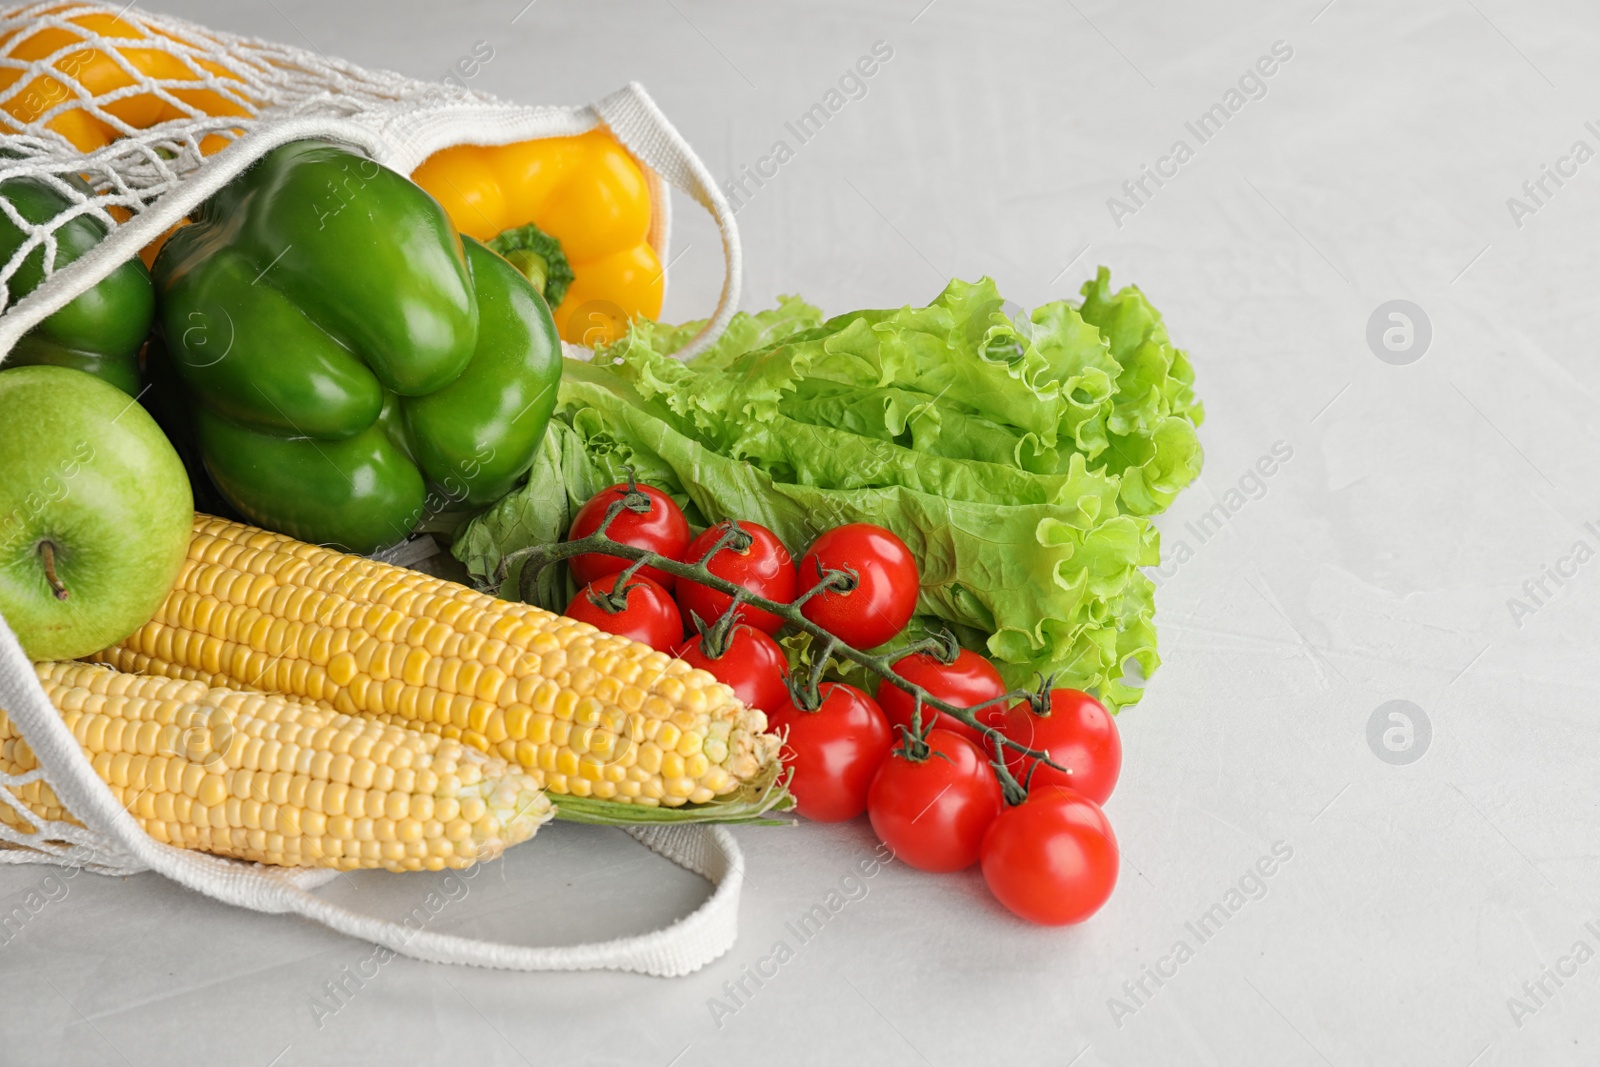 Photo of Different fresh vegetables and fruits in mesh bag on light table